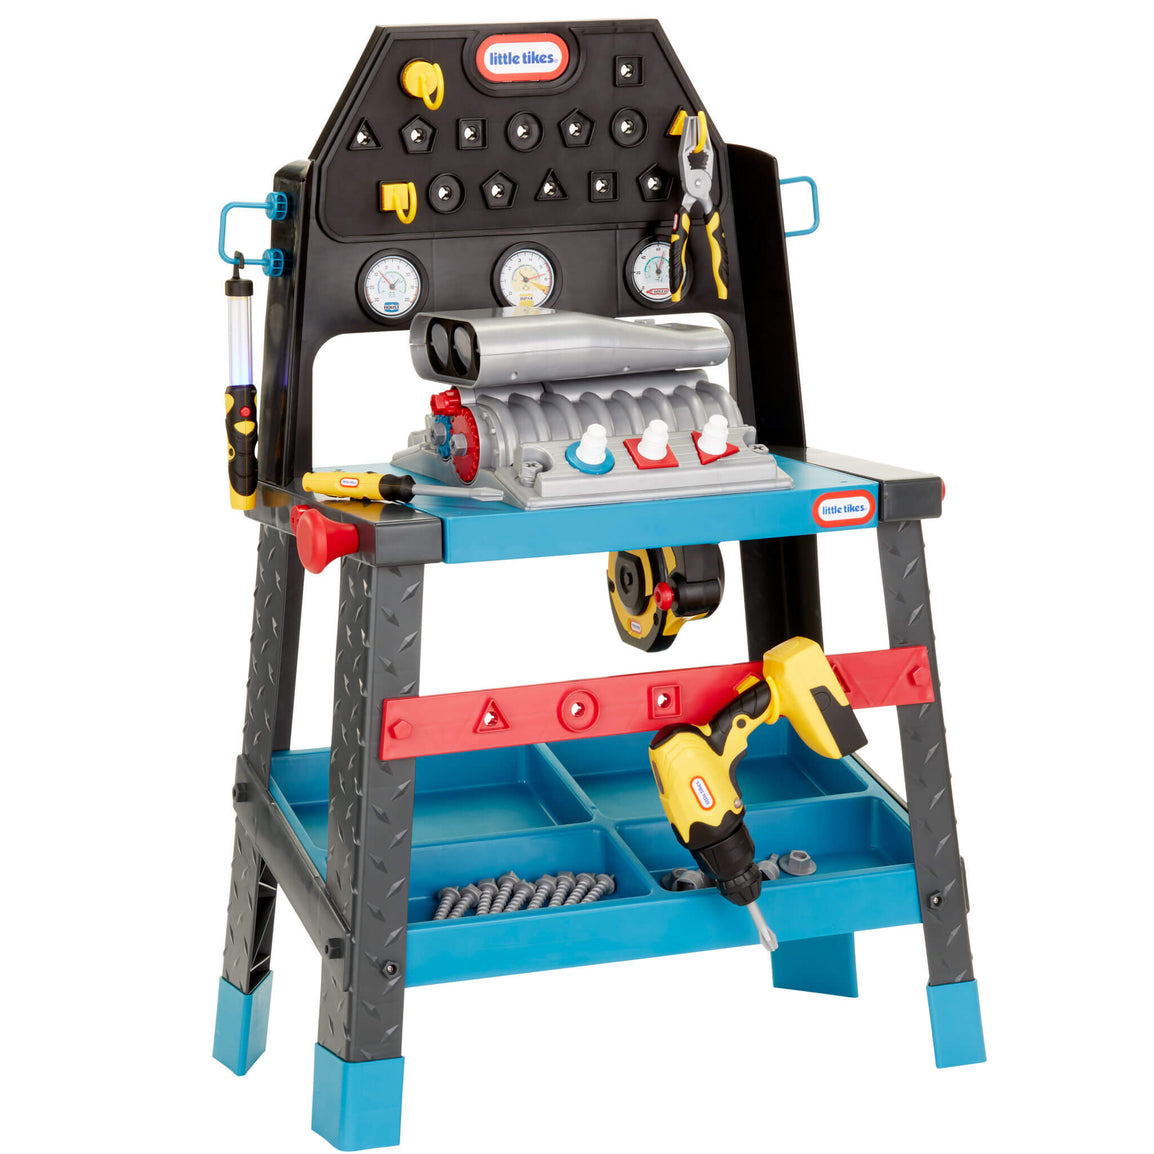 2-in-1 Buildin' to Learn Motor/Wood Shop™ - Official Little Tikes Website